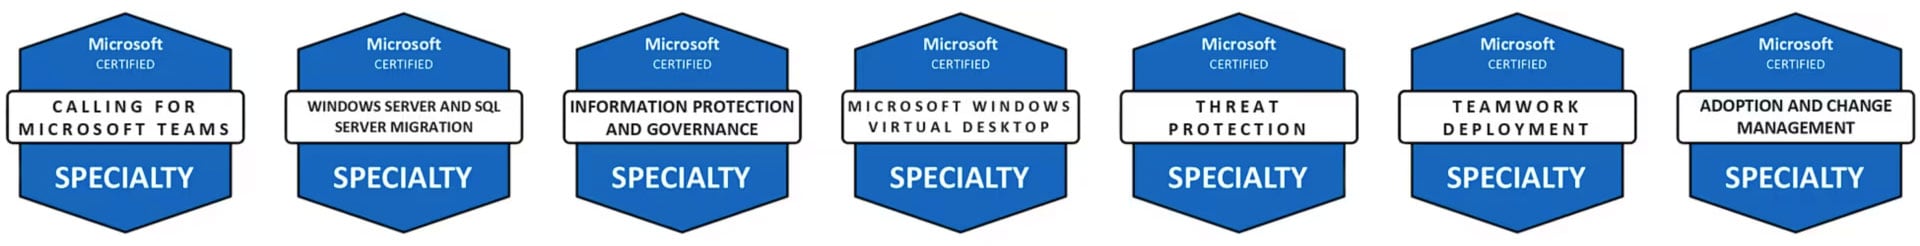 microsoft certified specialty